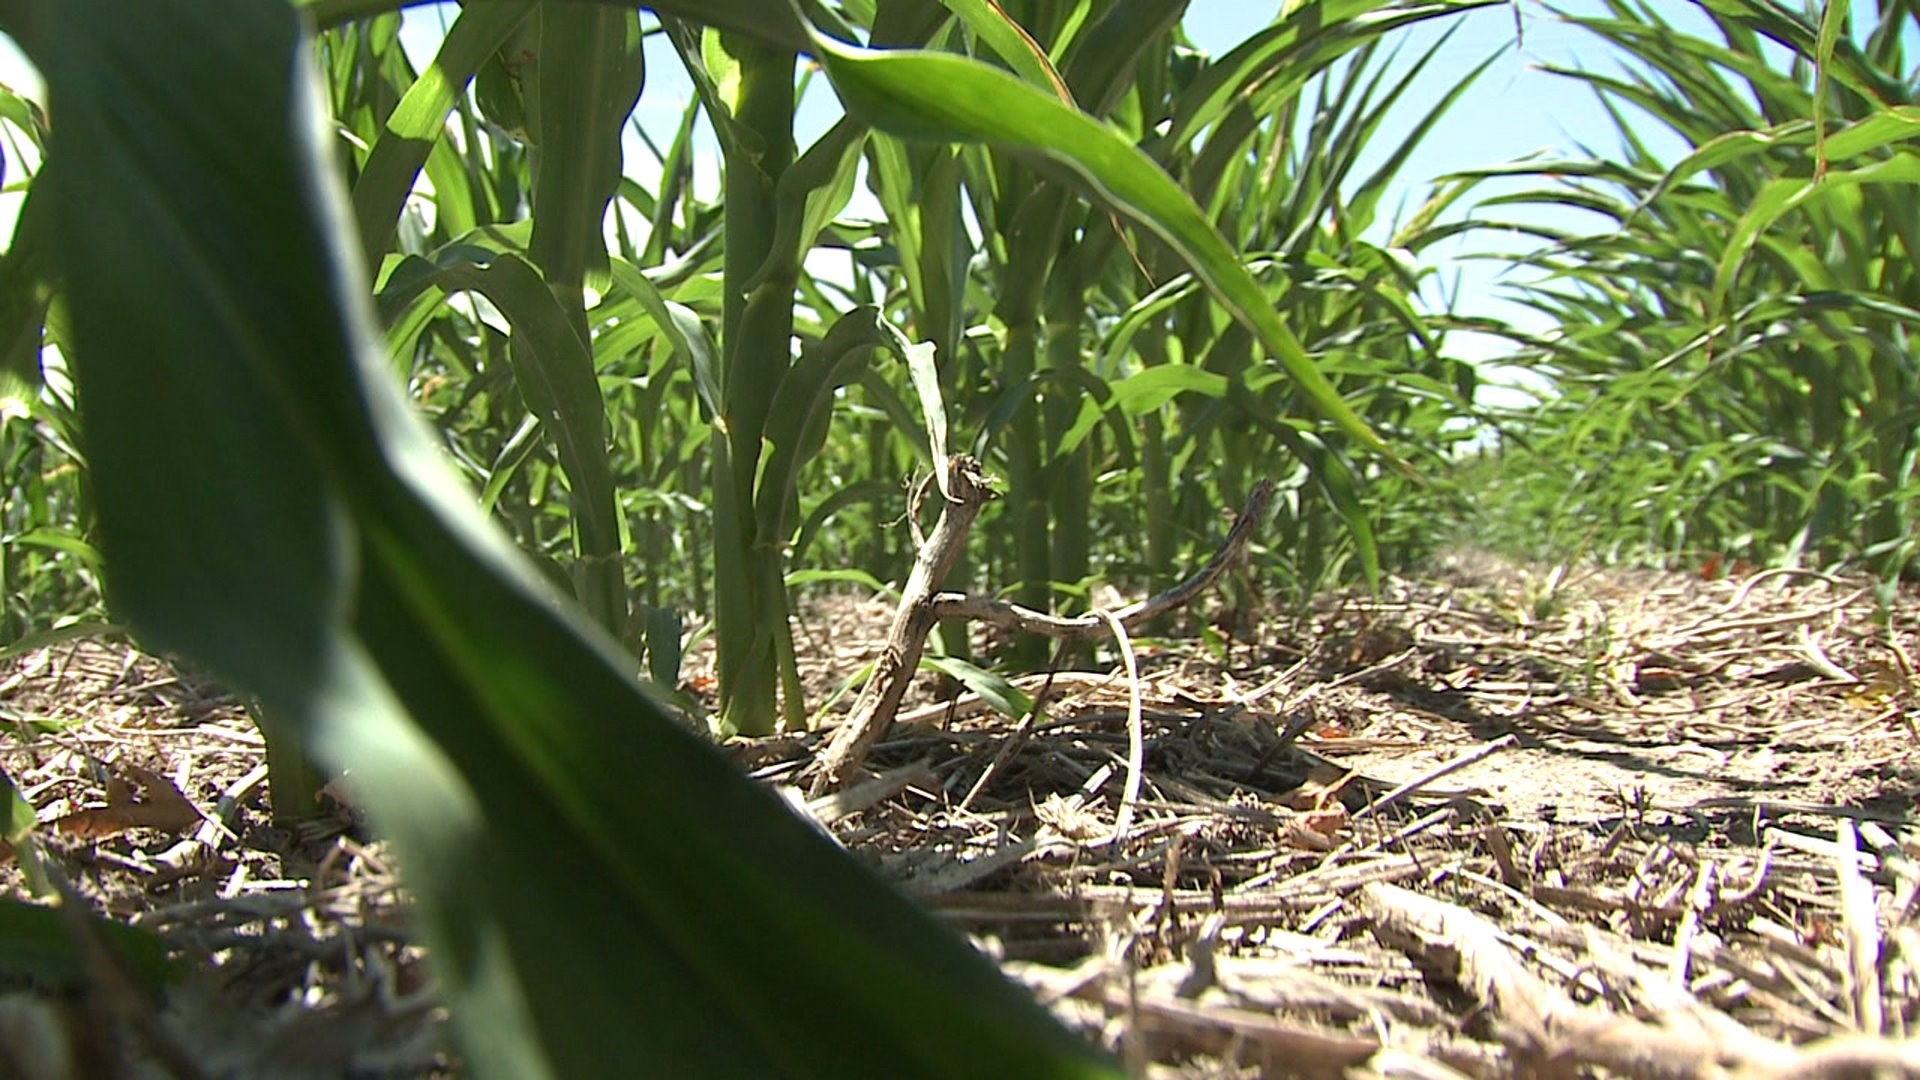 Drought conditions straining corn crop